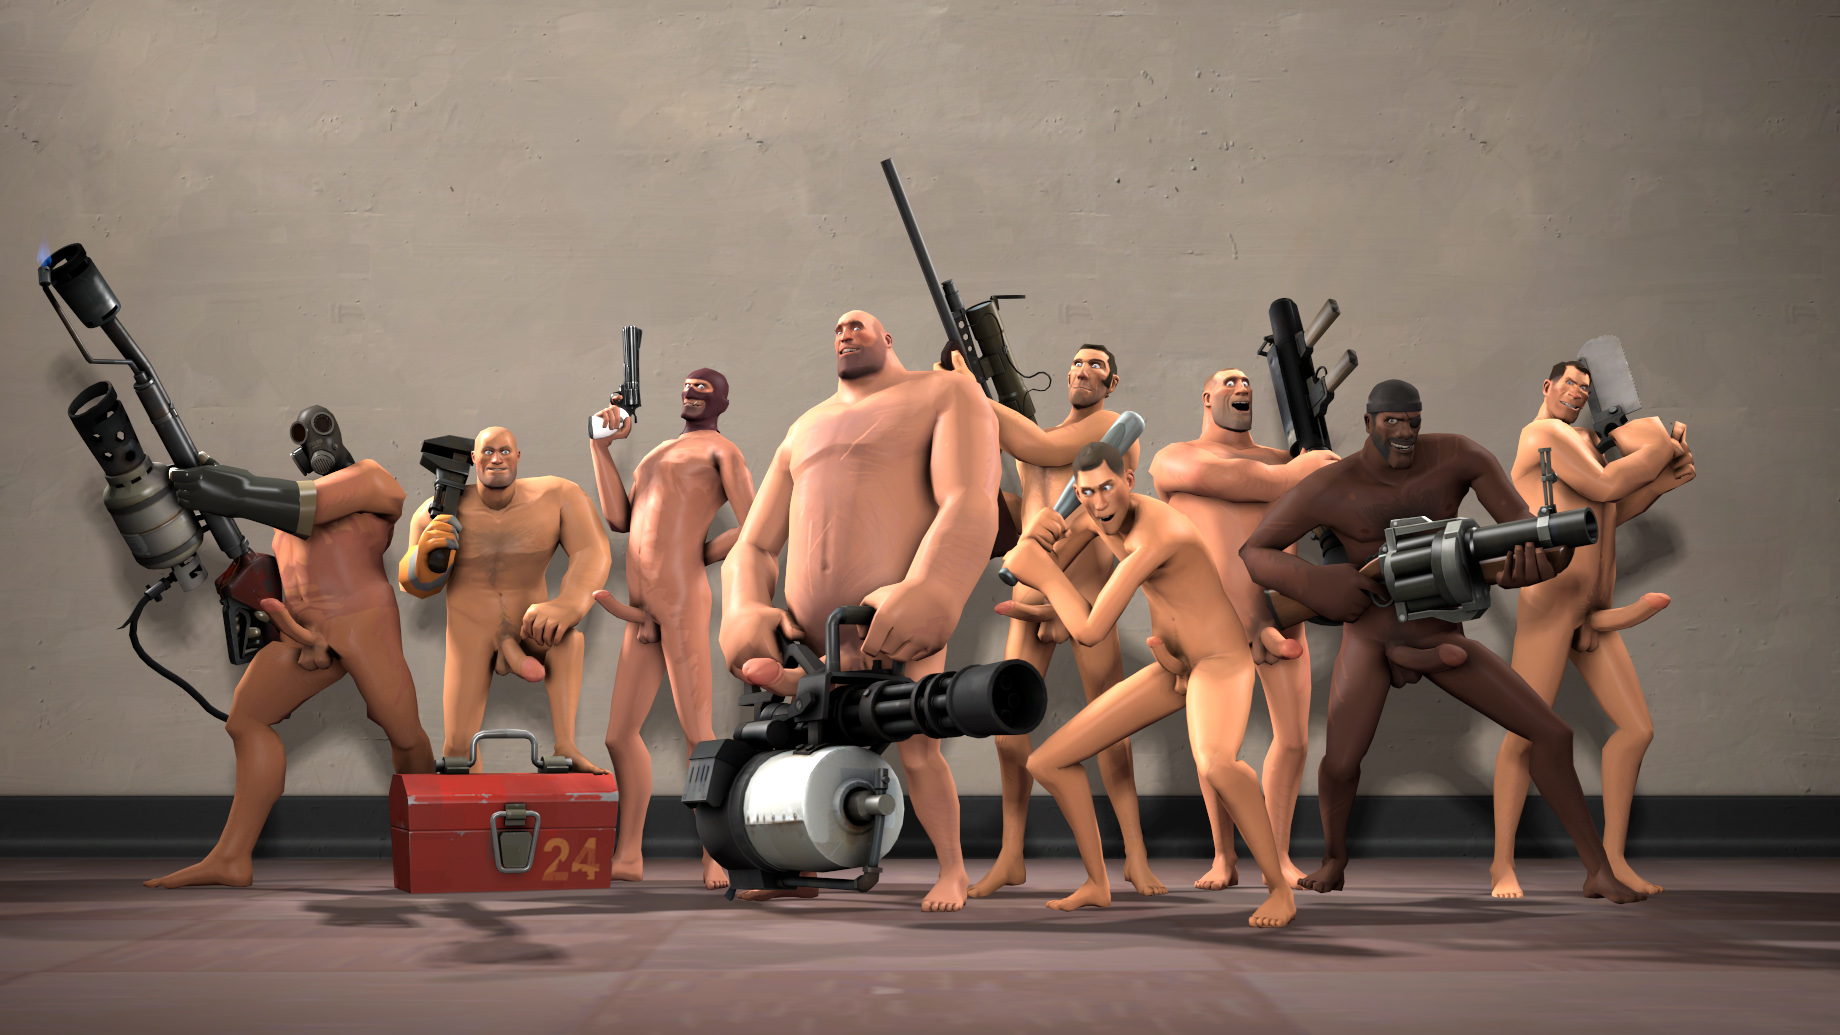 Tf2 Naked Models Gmodzip !!EXCLUSIVE! 